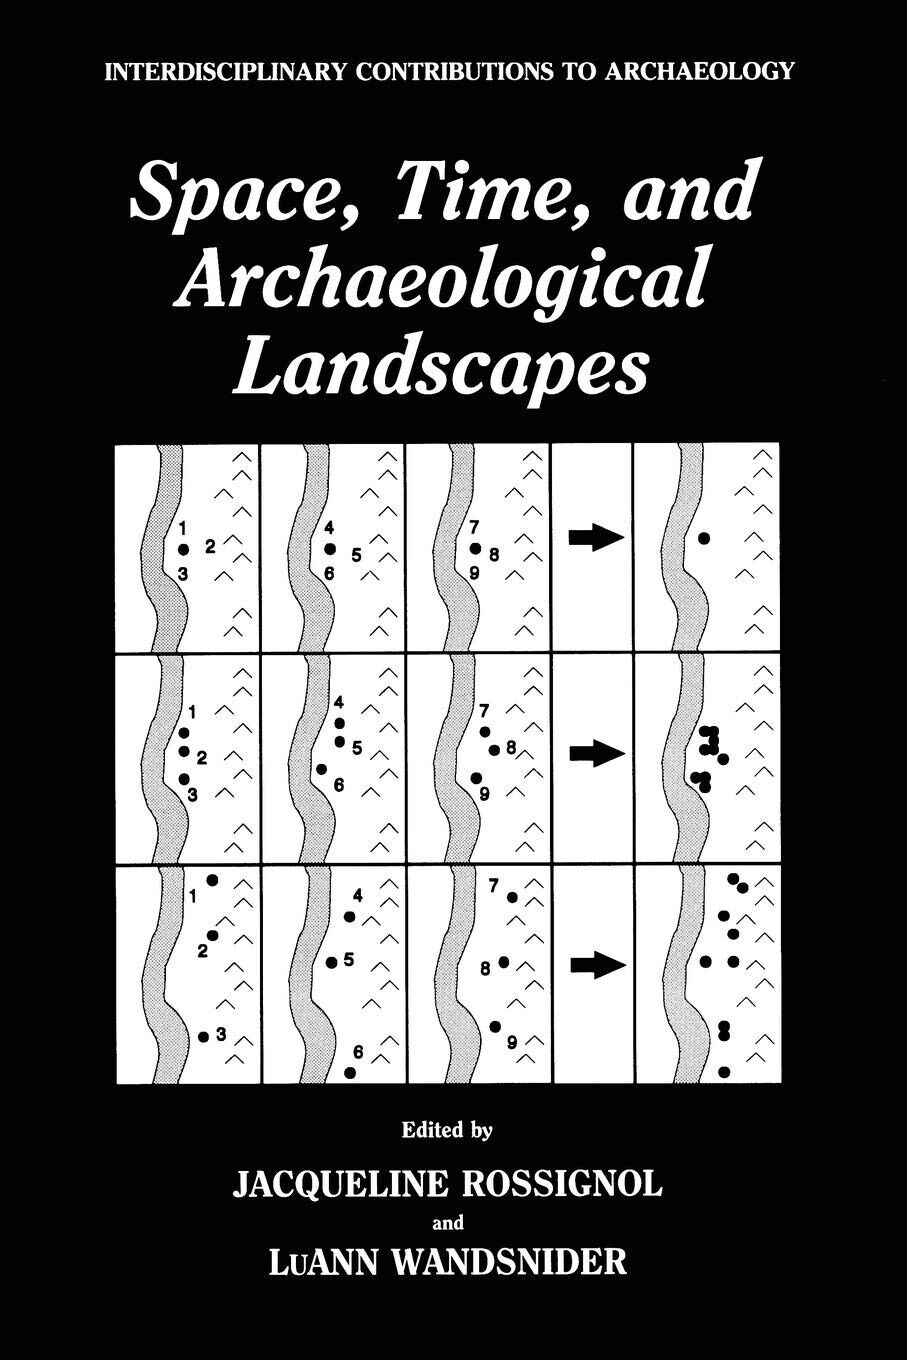 Space, Time, and Archaeological Landscapes - Jacqueline Rossignol - 2014